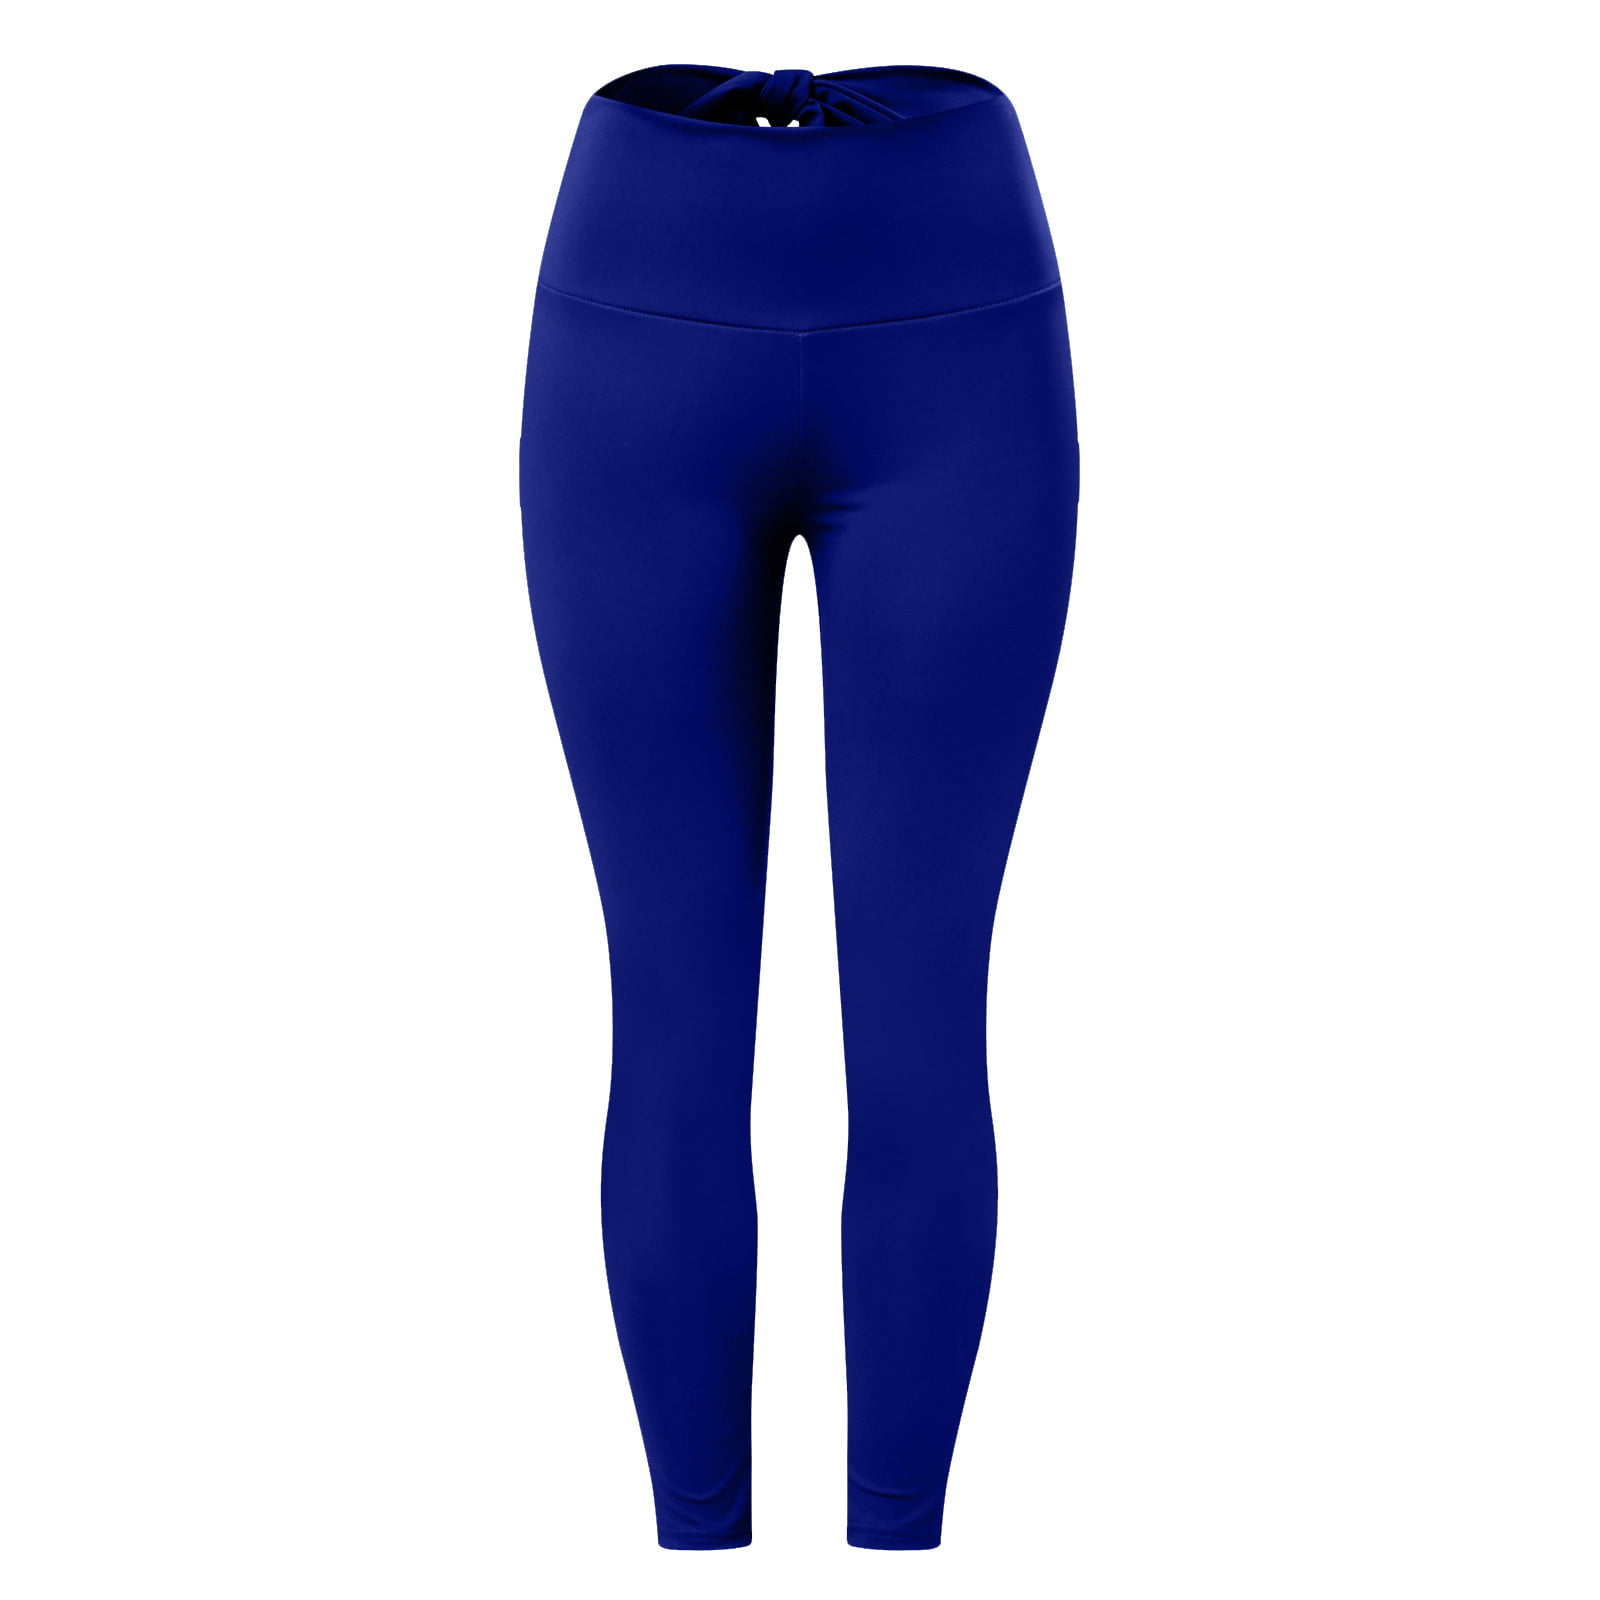 Mipaws Women's High Rise Leggings 7/8 Length Yoga Pants with Tummy Control  Seamless Waistband (XS, Lilac Blue) : Buy Online at Best Price in KSA -  Souq is now : Fashion